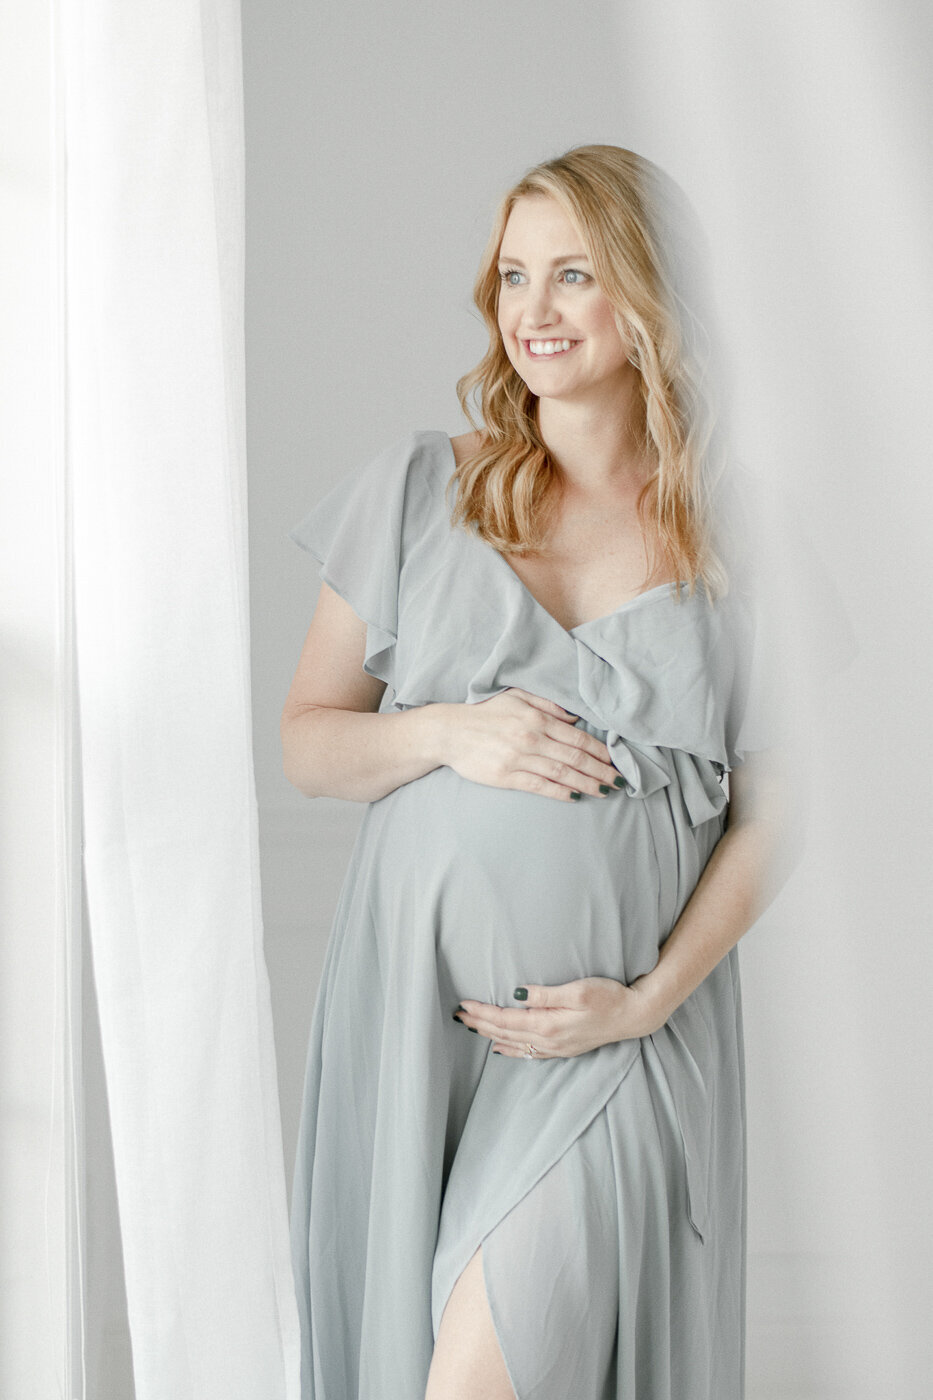 Pregnant woman in a. blue dress smiles out the window By Nashville maternity photographer Kristie Lloyd